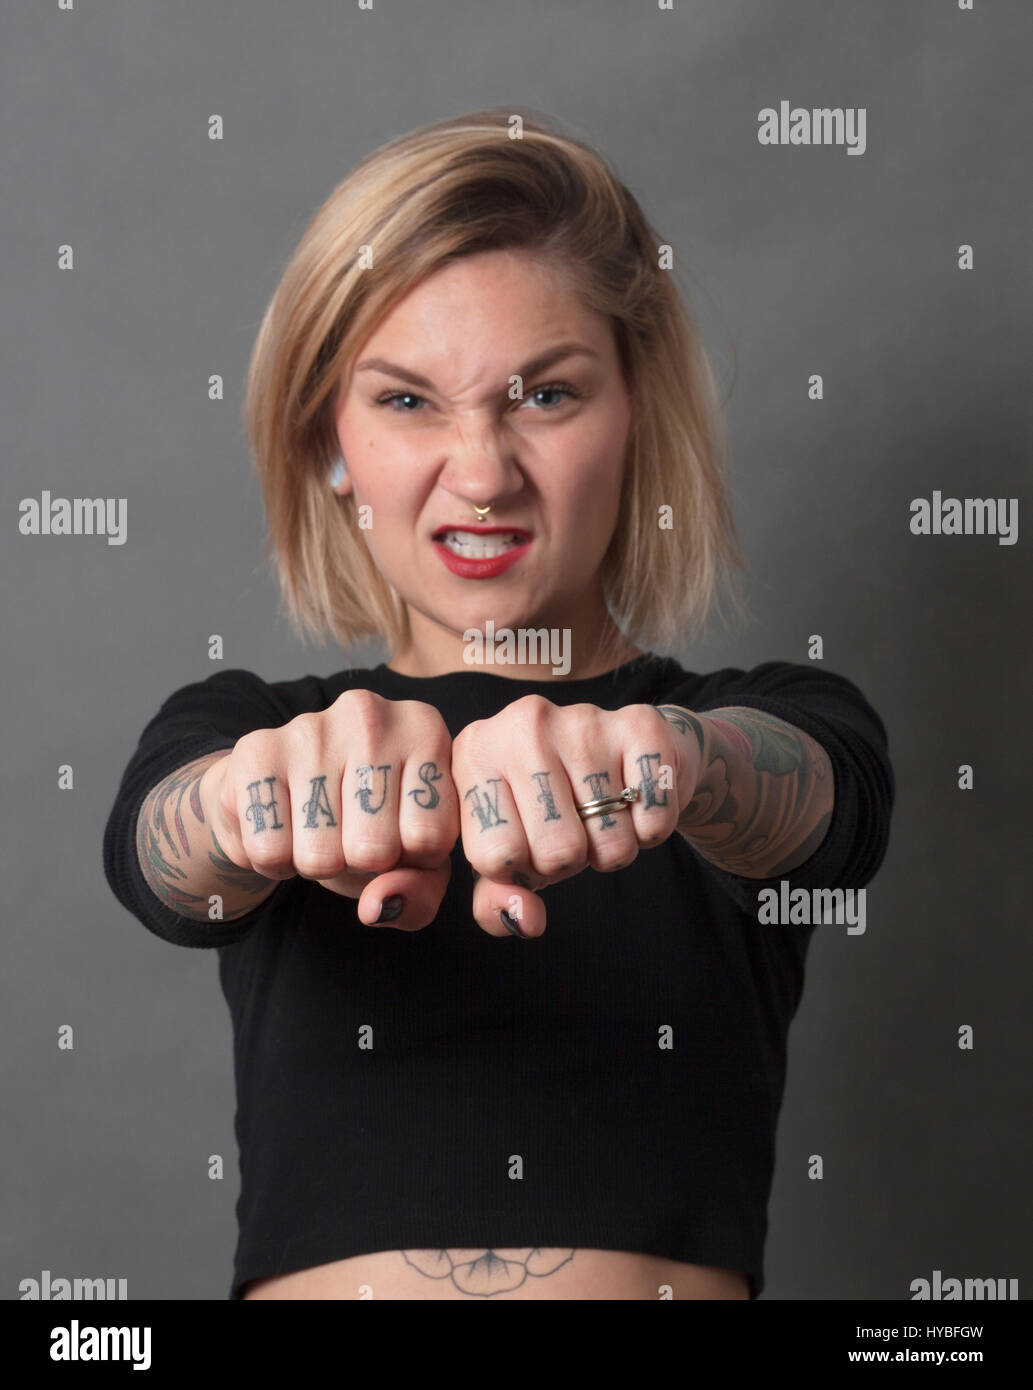 Young woman with angry facial expression, holding her hands in front of her, the hands with Hause wife tatooe on her fingers. Wearing black t-shirt, r Stock Photo